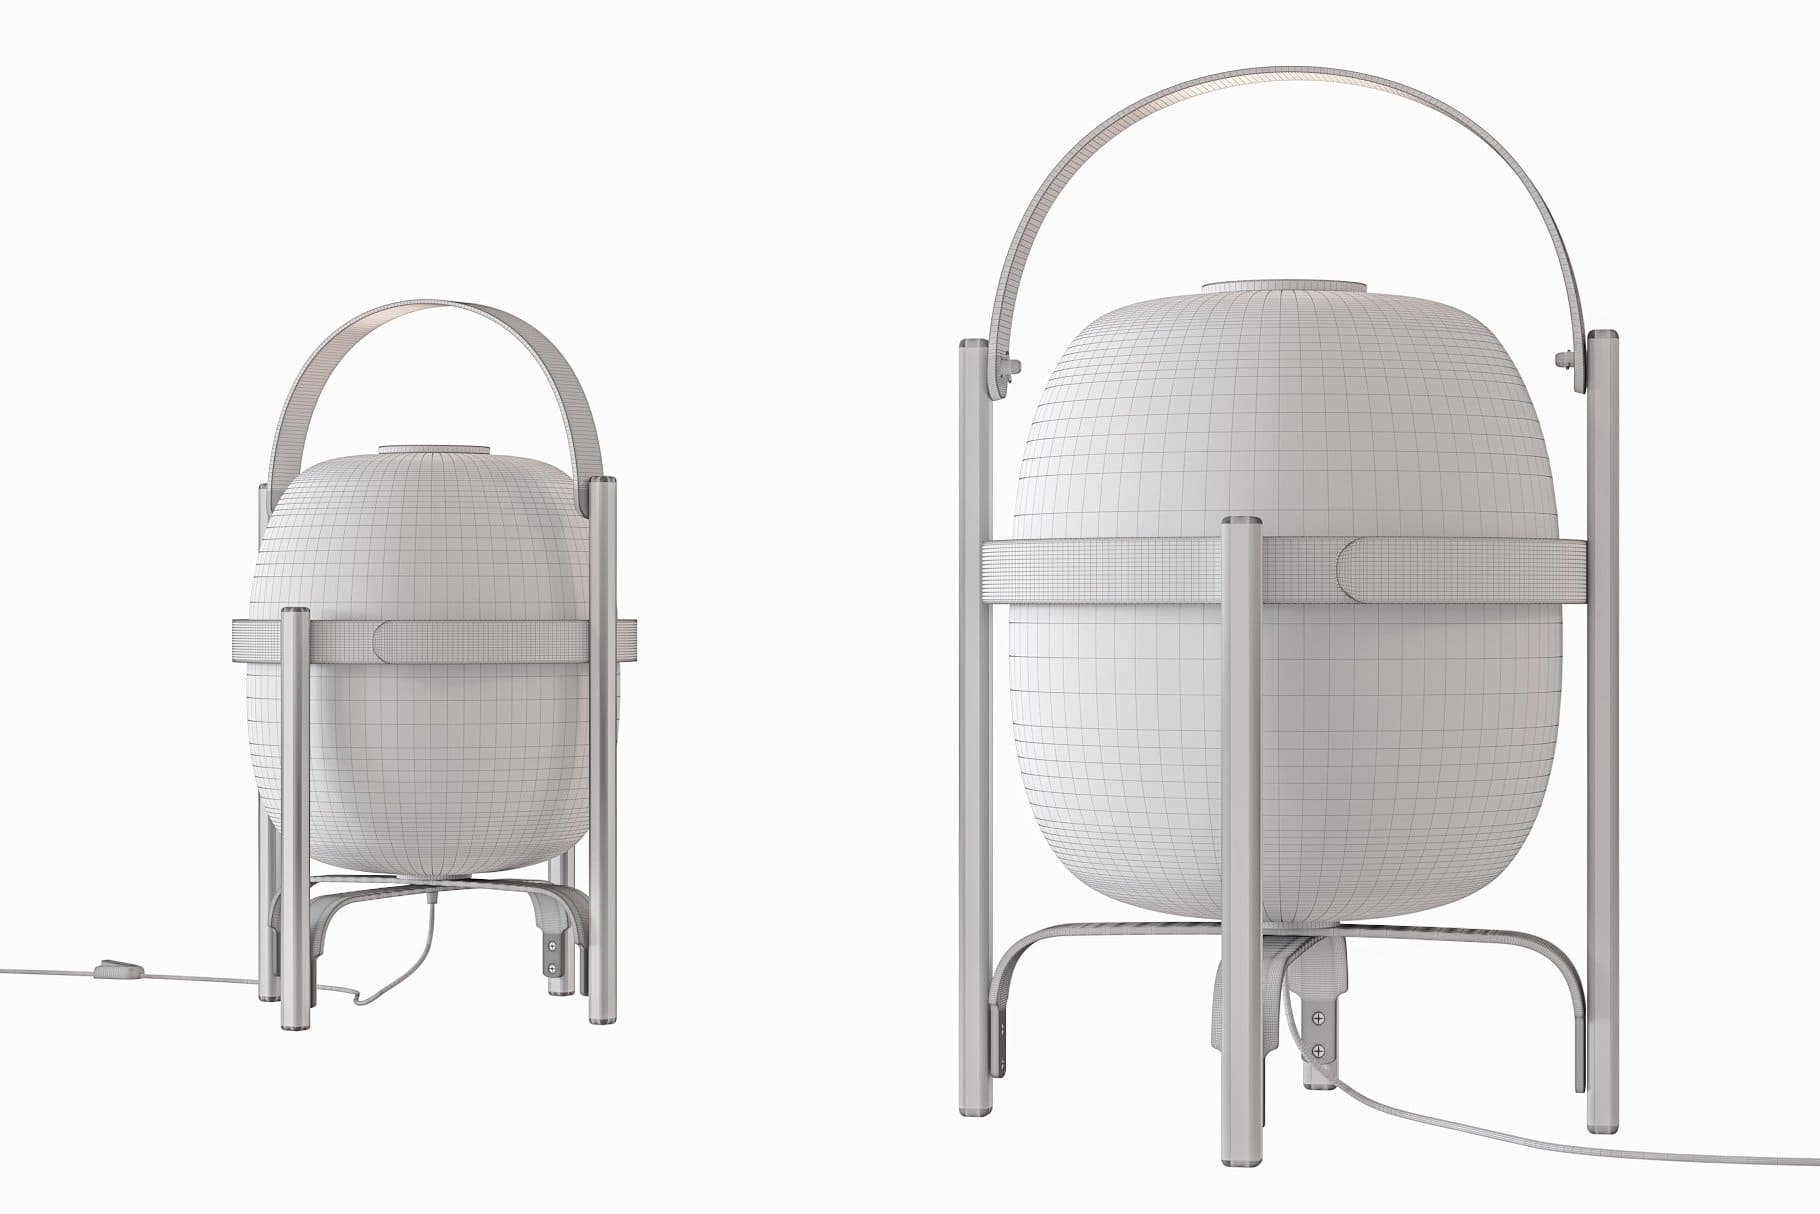 Two mesh models of the cesta table lamp on a white background.